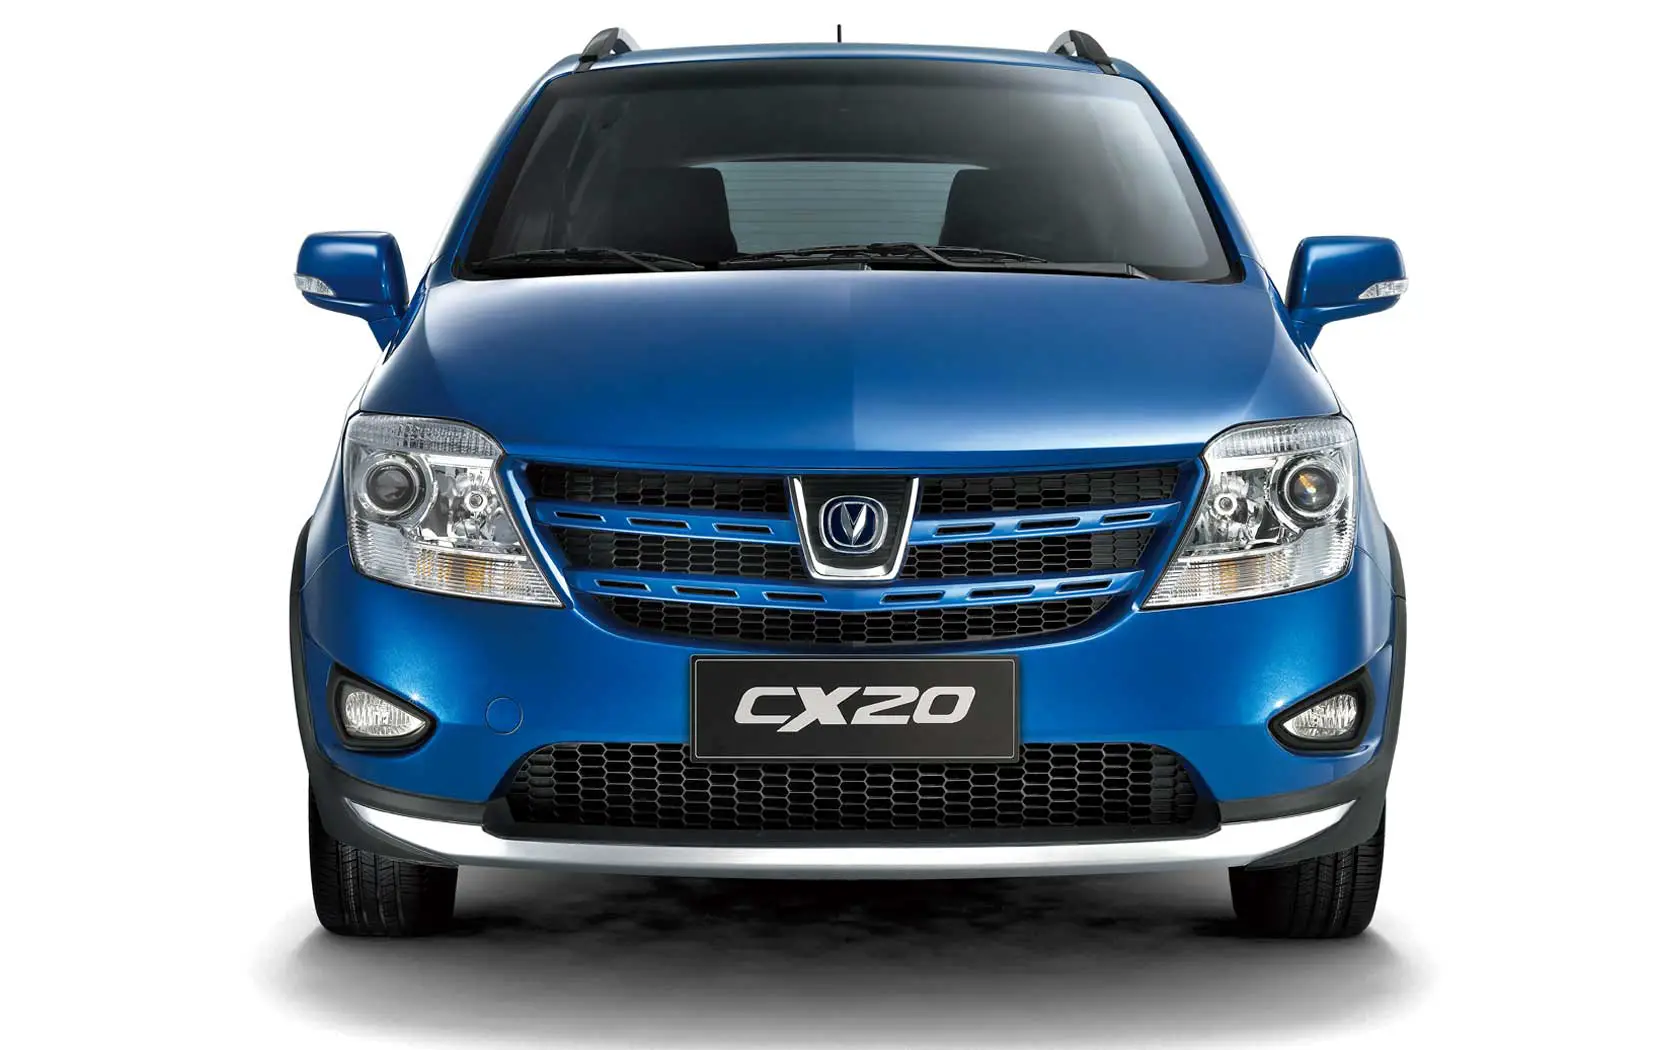 2014 Changan CX20 1.4L AMT Sunroof Exterior front view